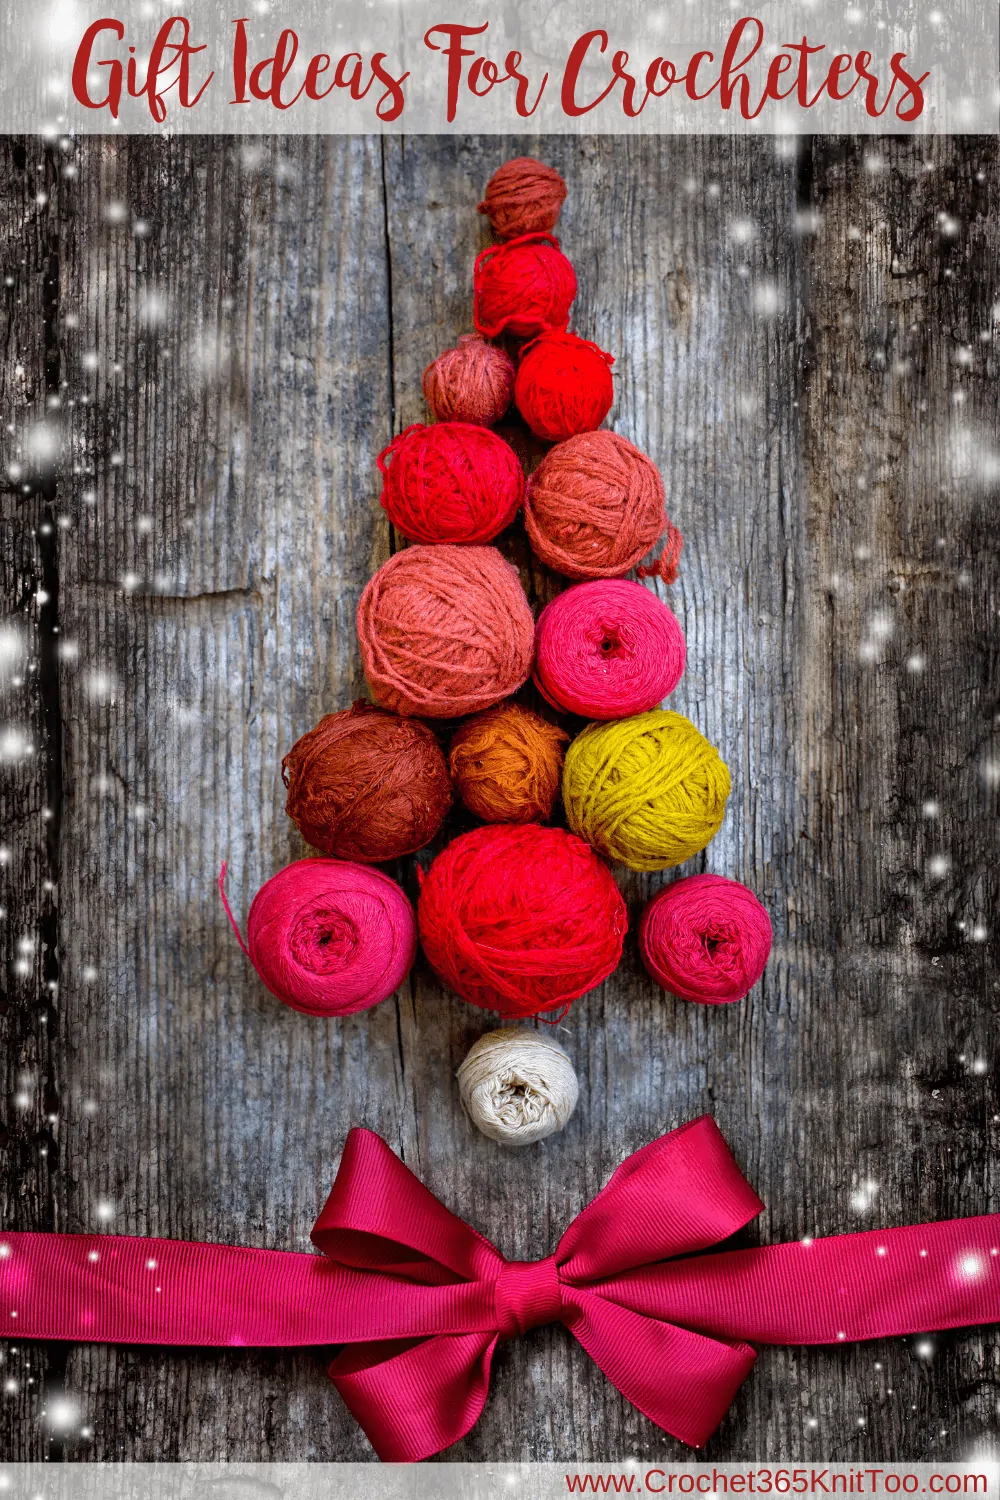 pink, red and green yarn balls in a tree shape with a pink bow